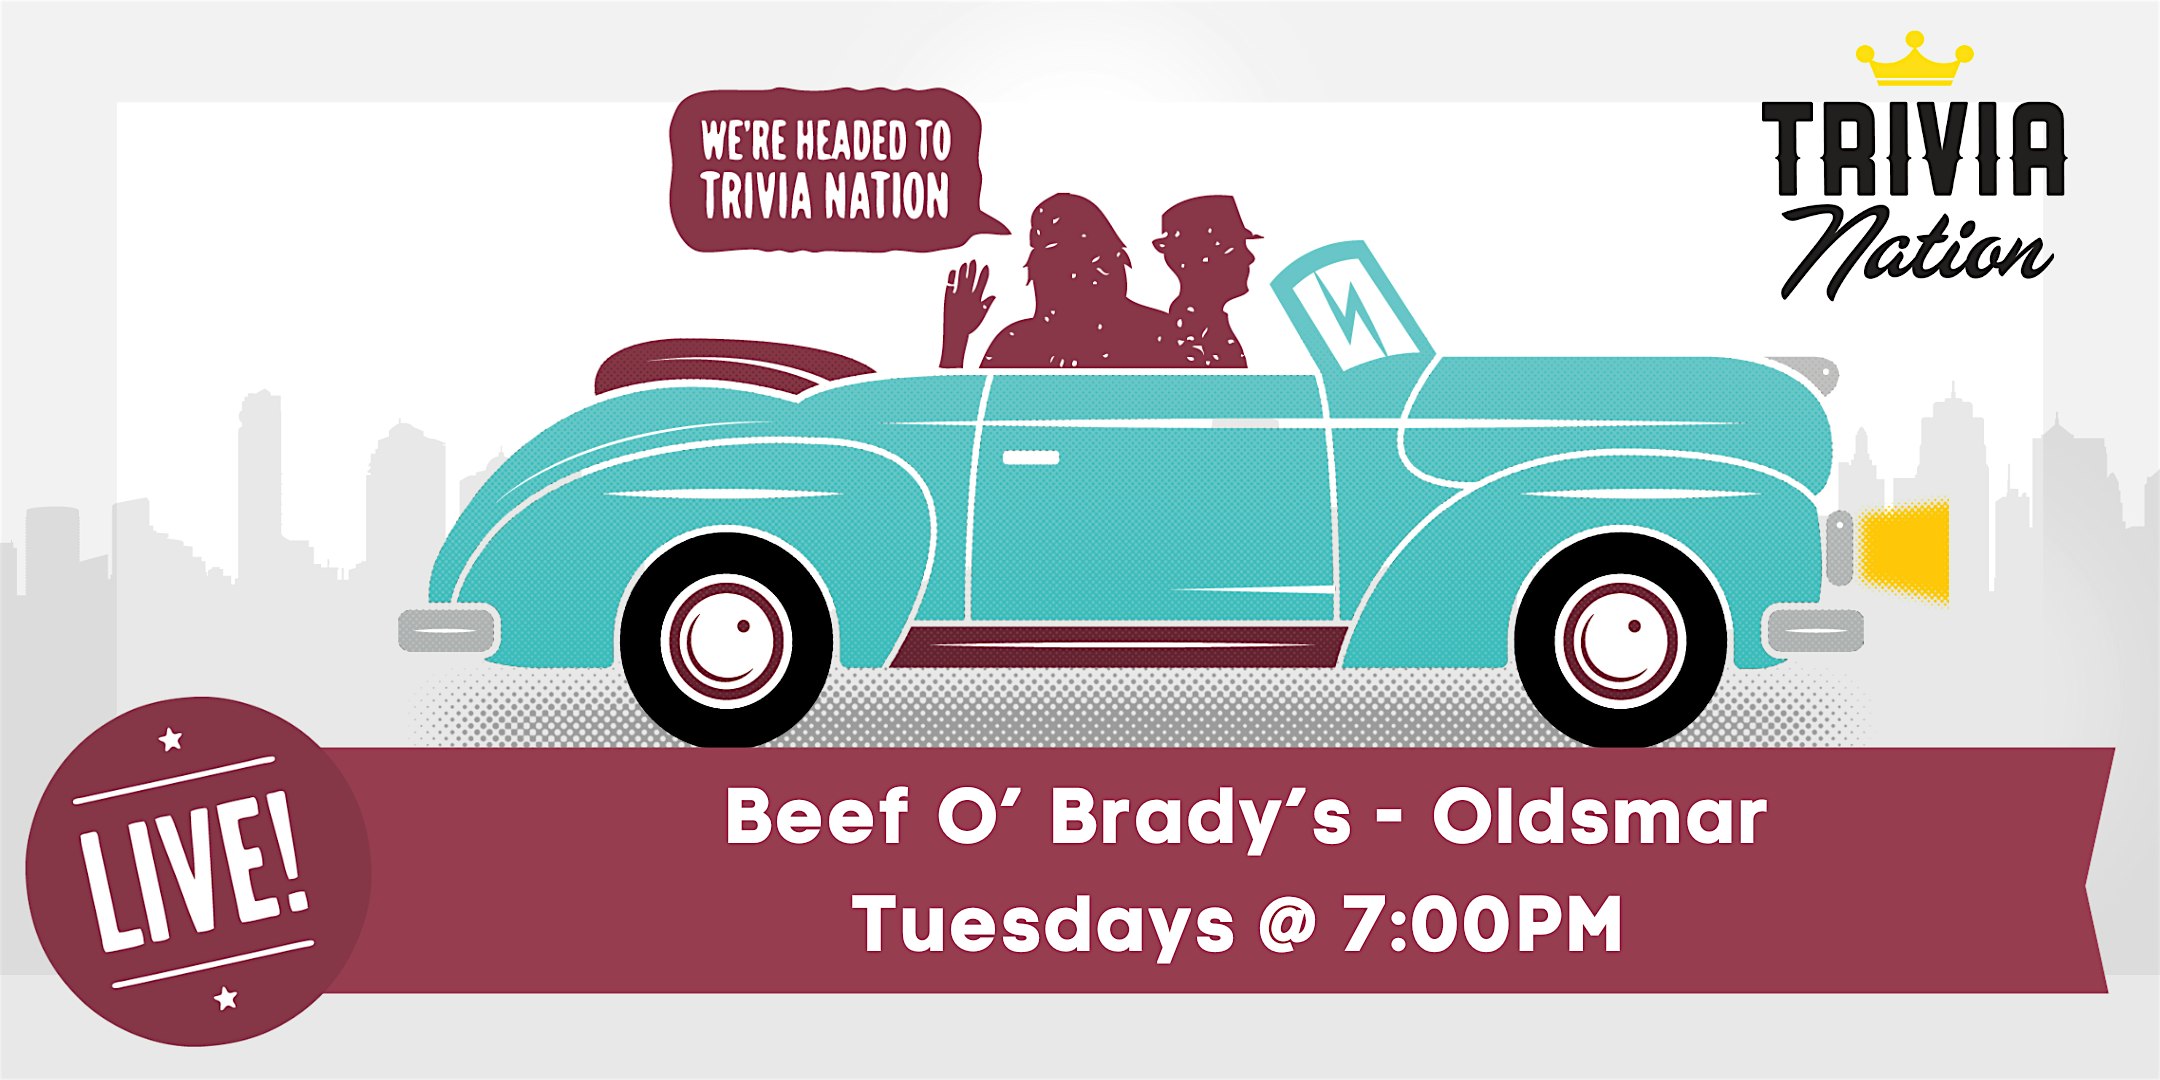 General Knowledge Trivia at Beef 'O' Brady's - Oldsmar - $100 in prizes!